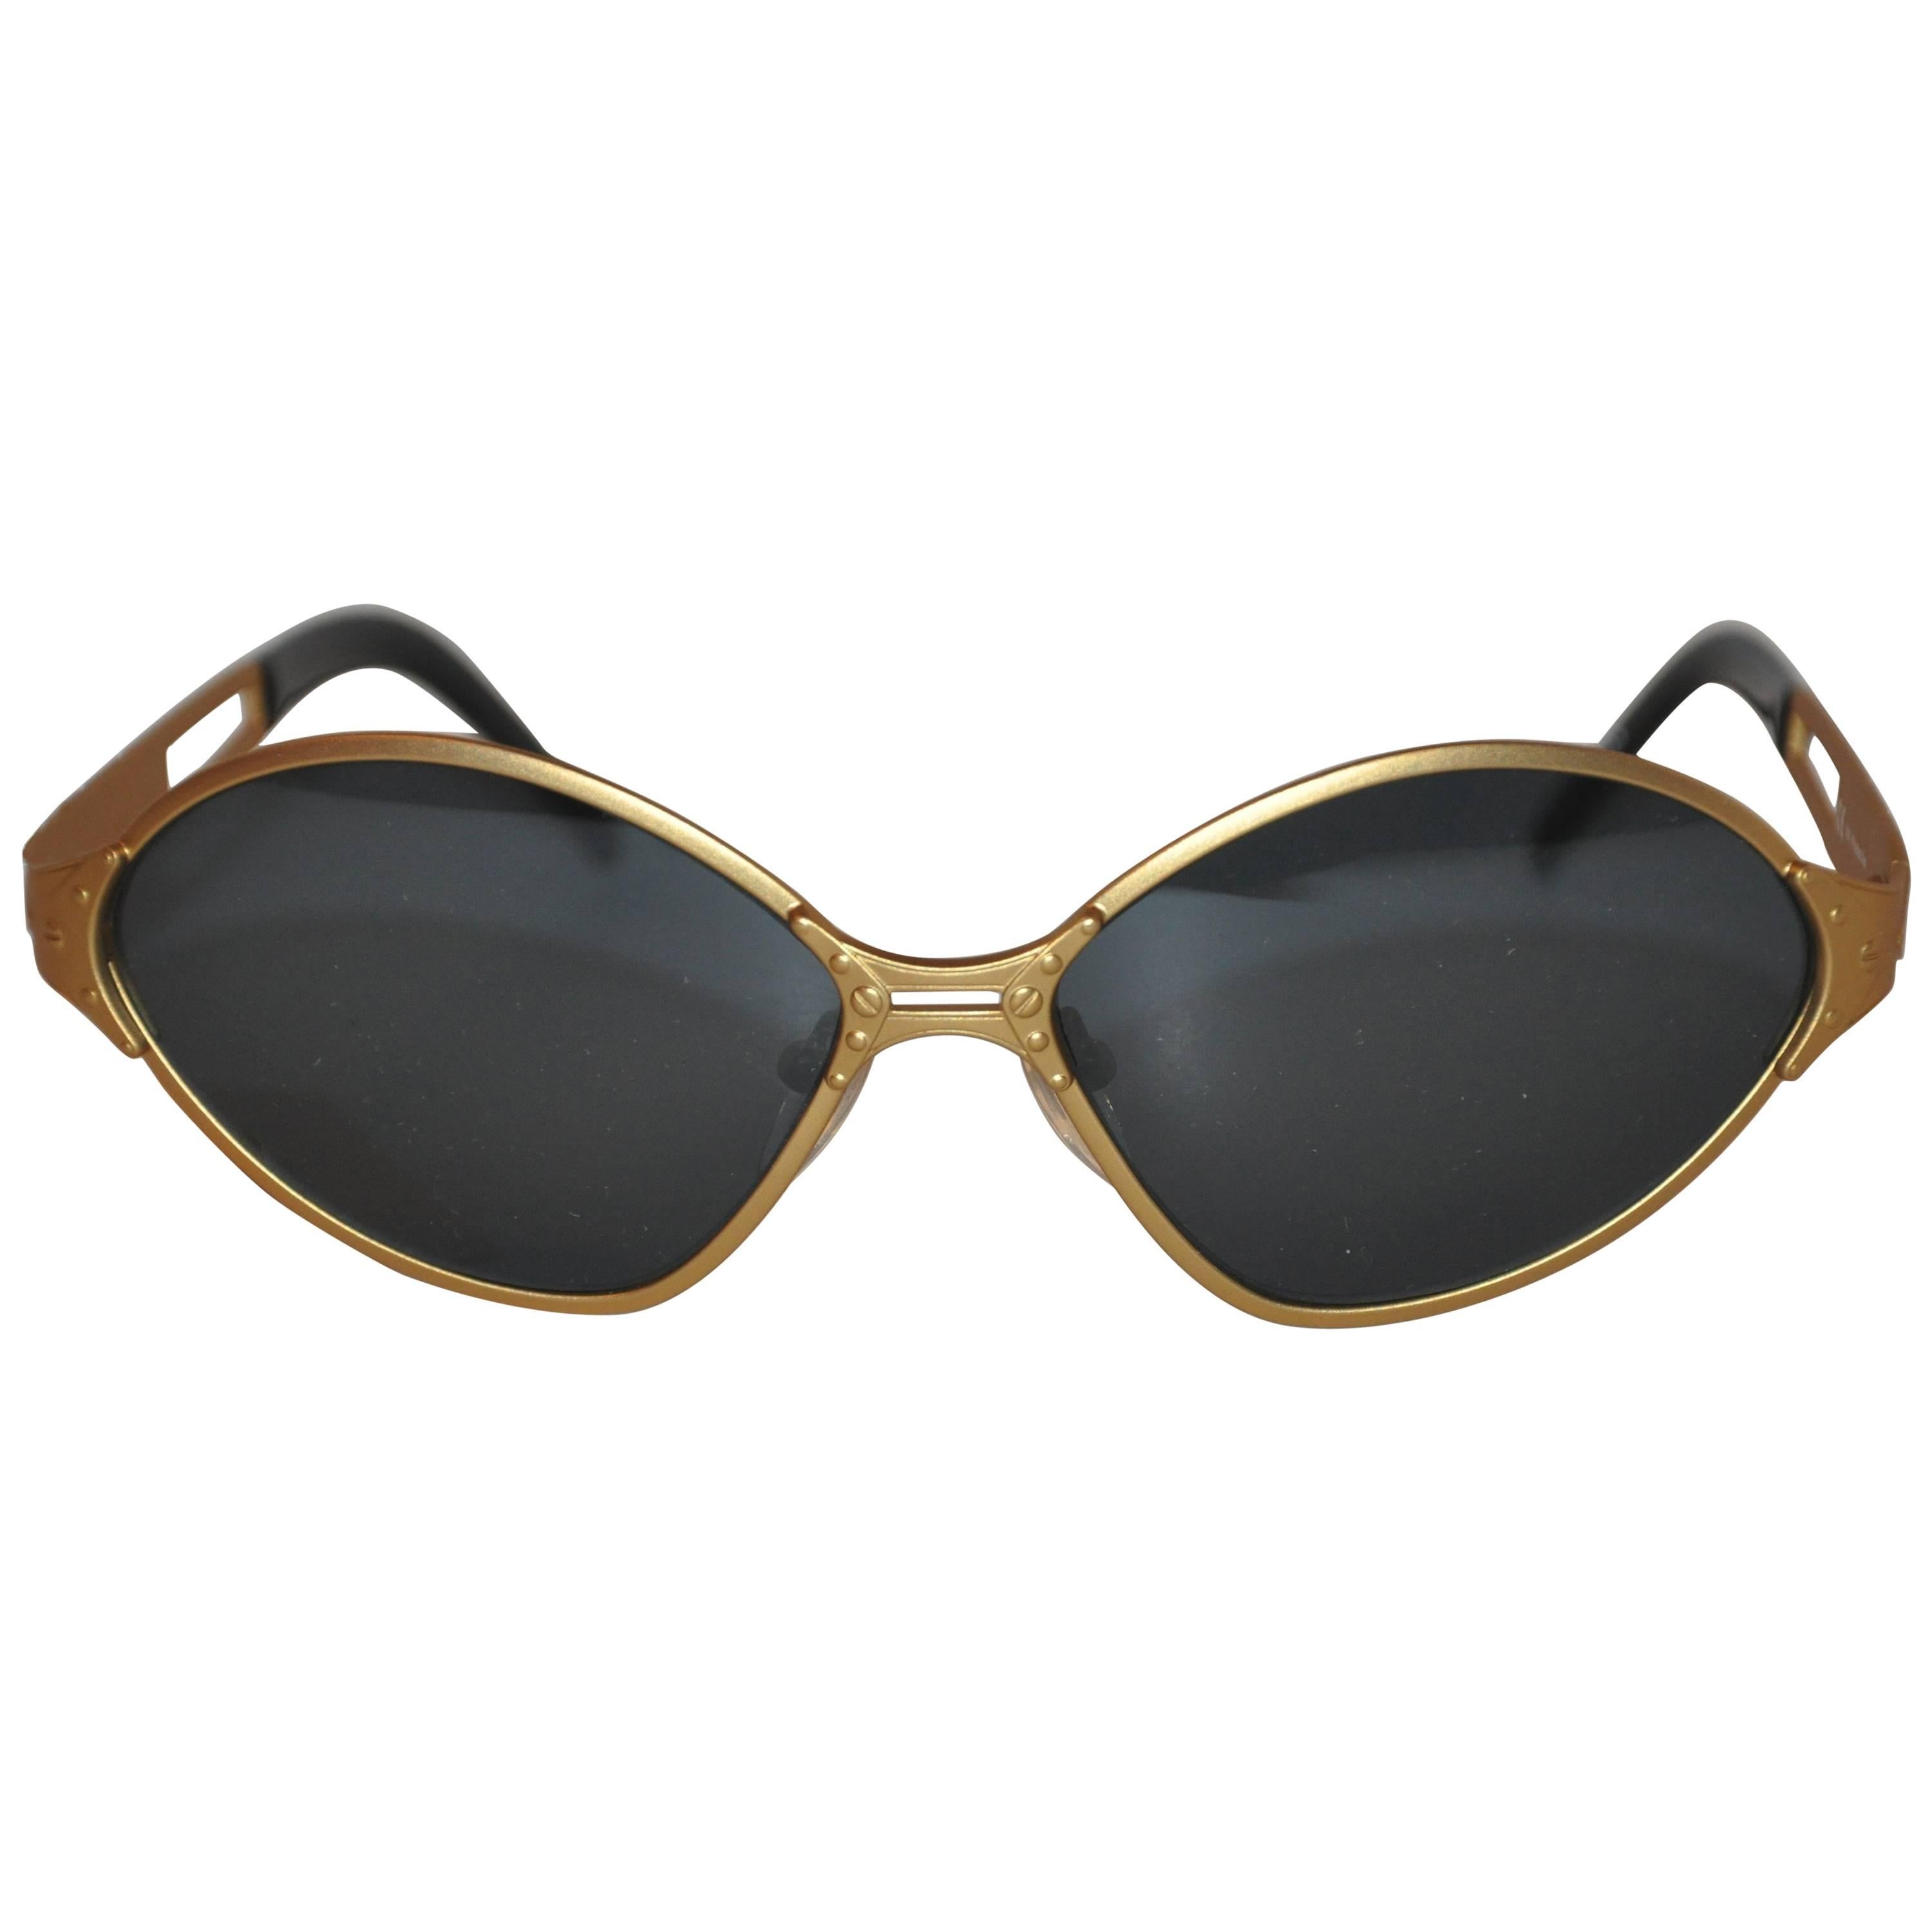 Jean Paul Gaultier Gold Tone Accented with Stud Sunglasses